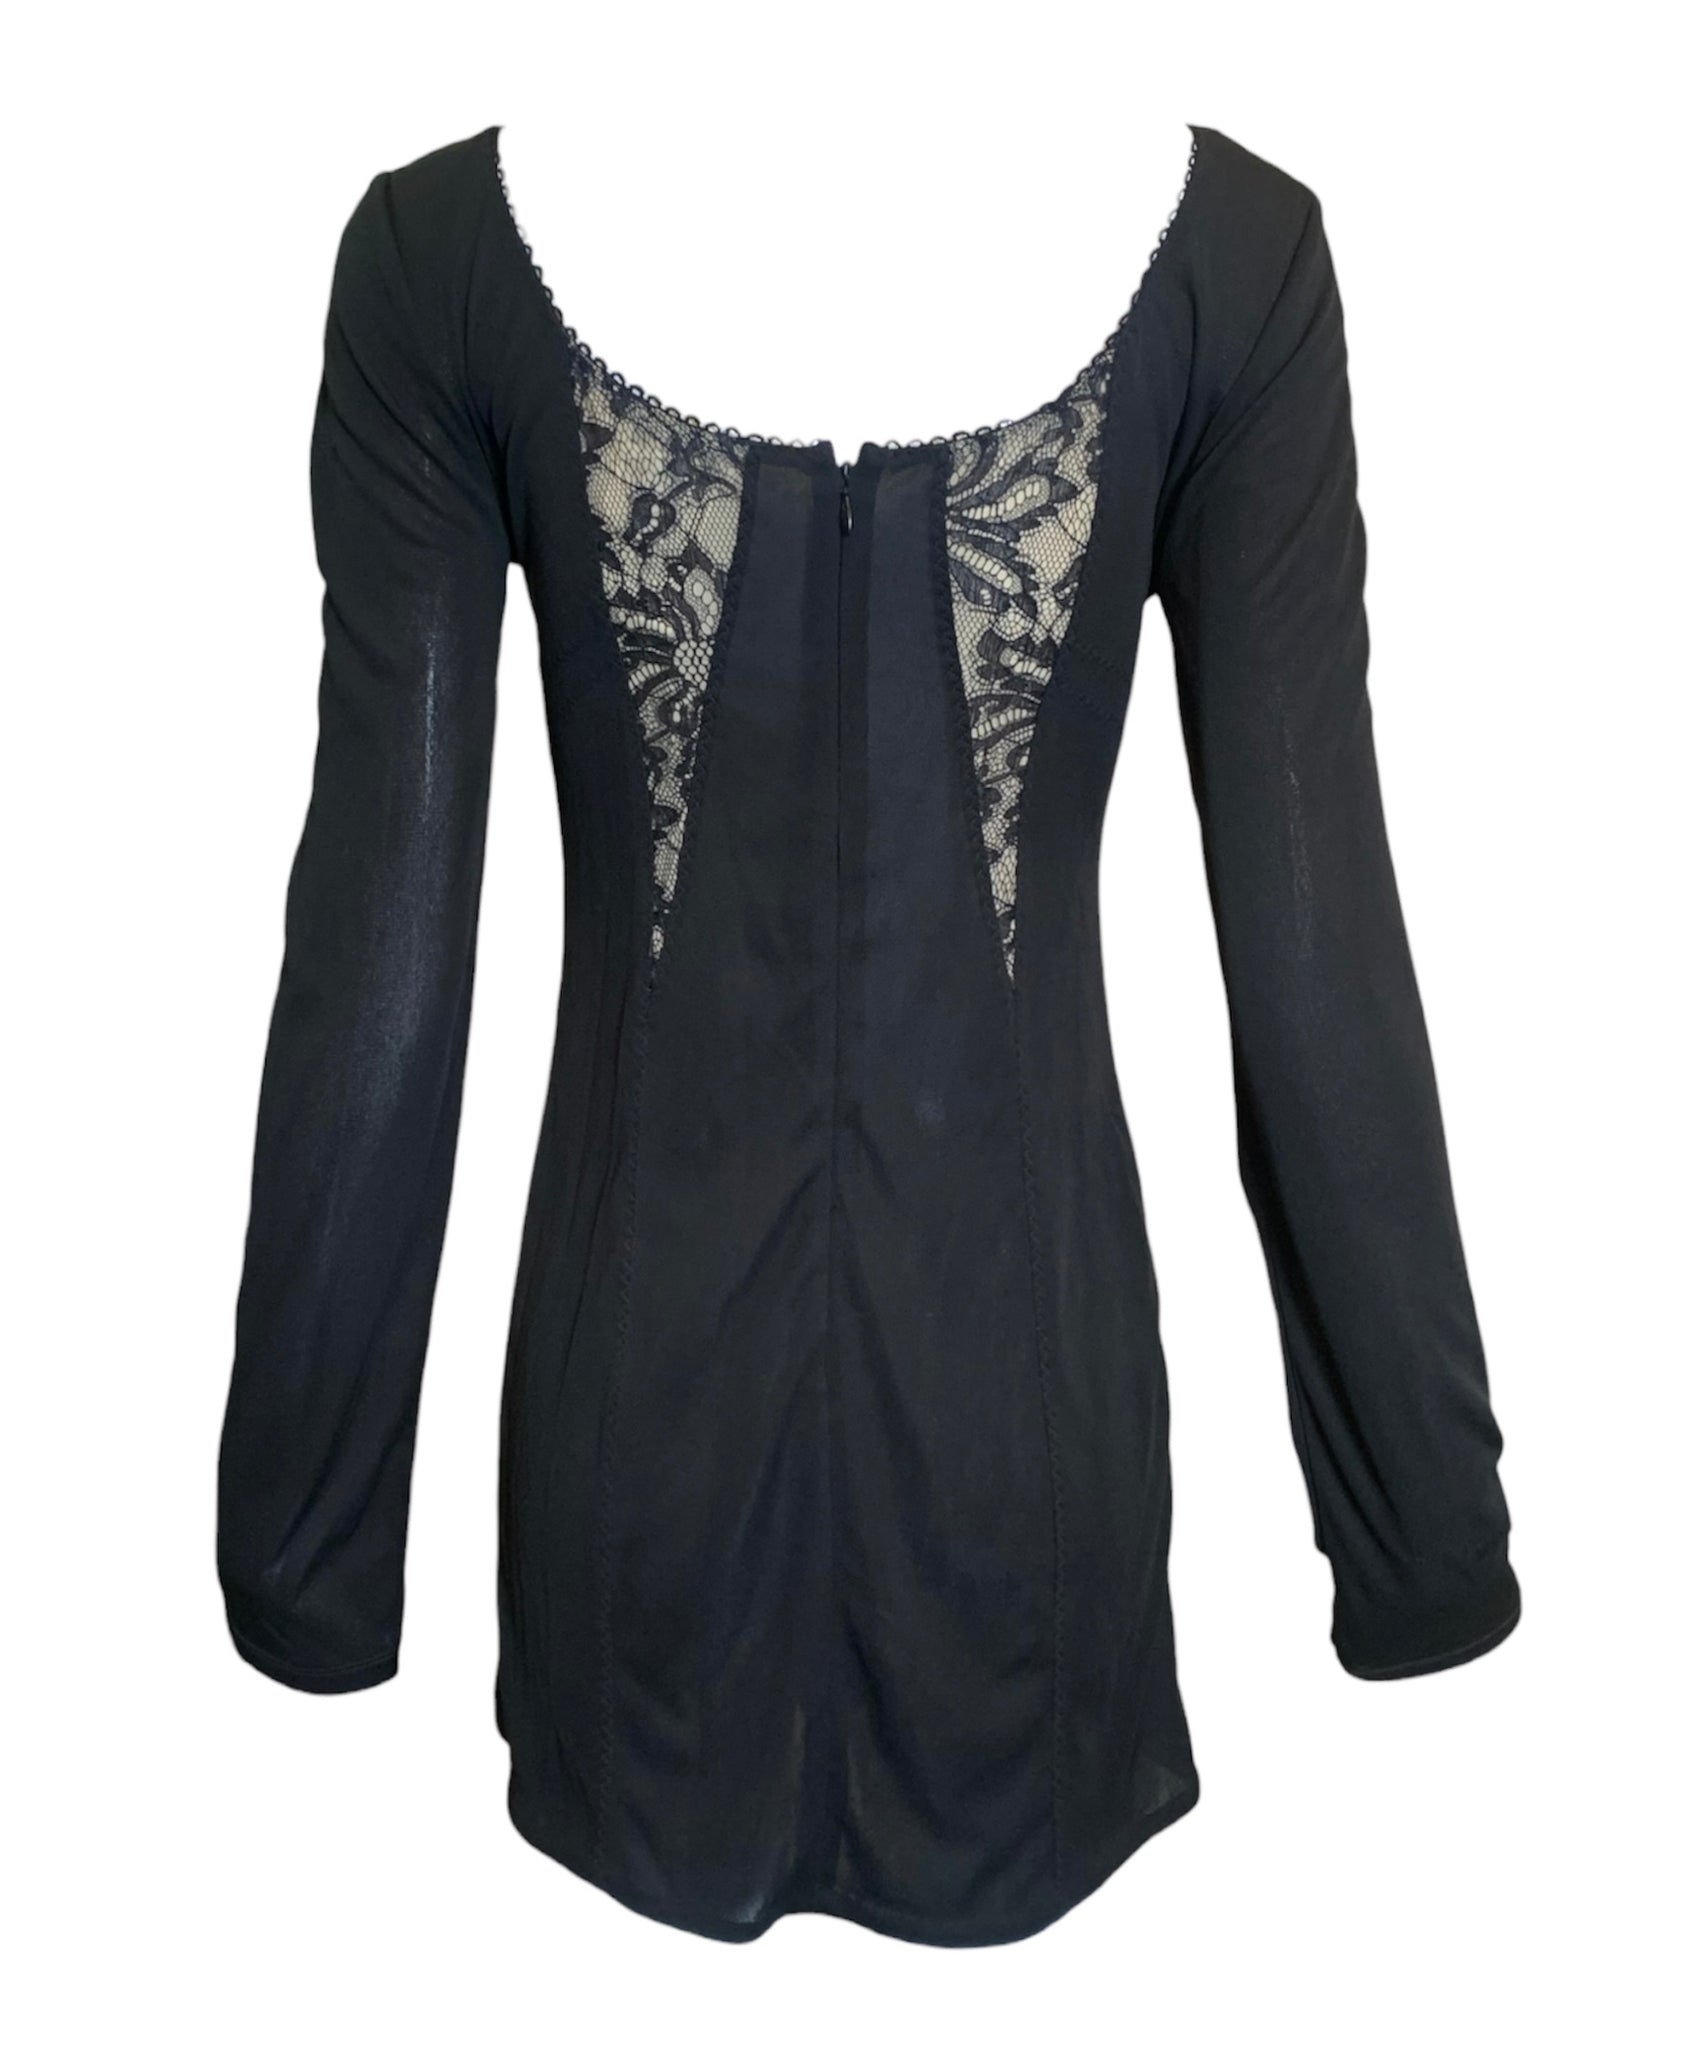  D&G 2000s Black Long Sleeve Mini Dress with Lace Panels BACK 3 of 5